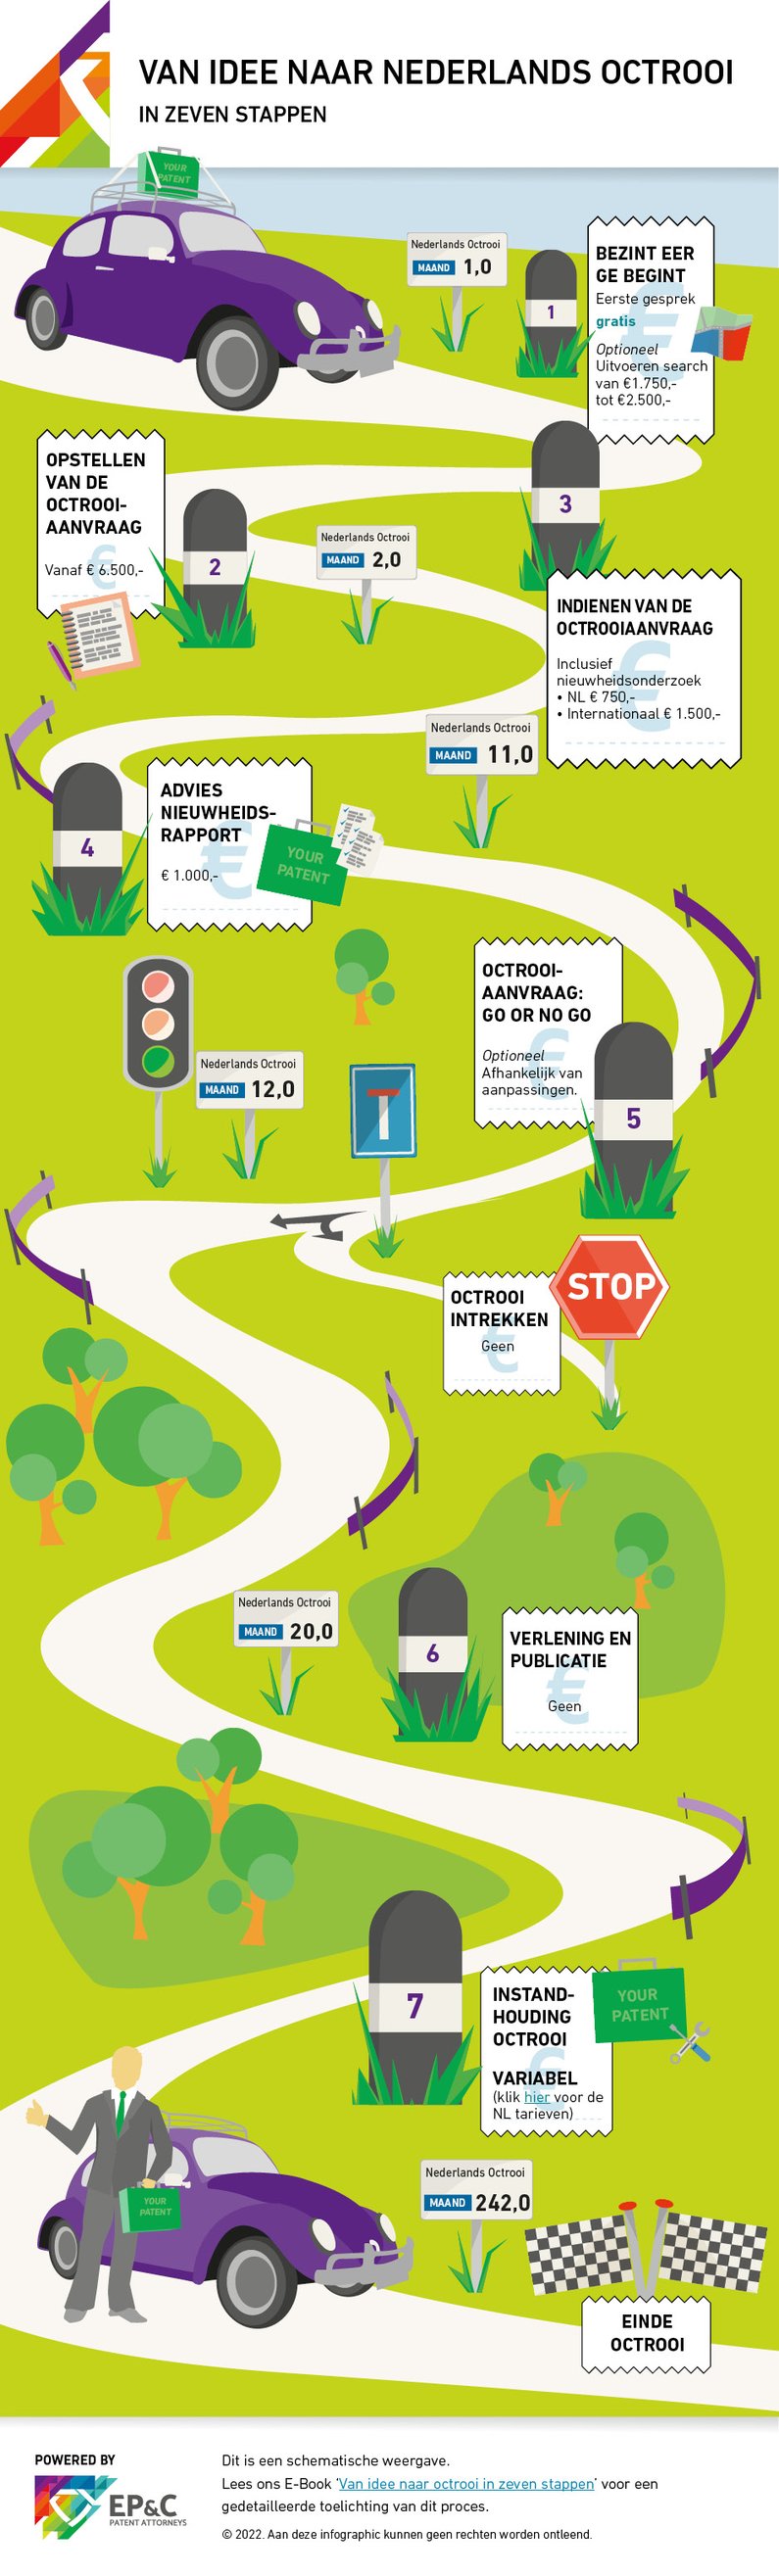 Infographic Route octrooiaanvraag